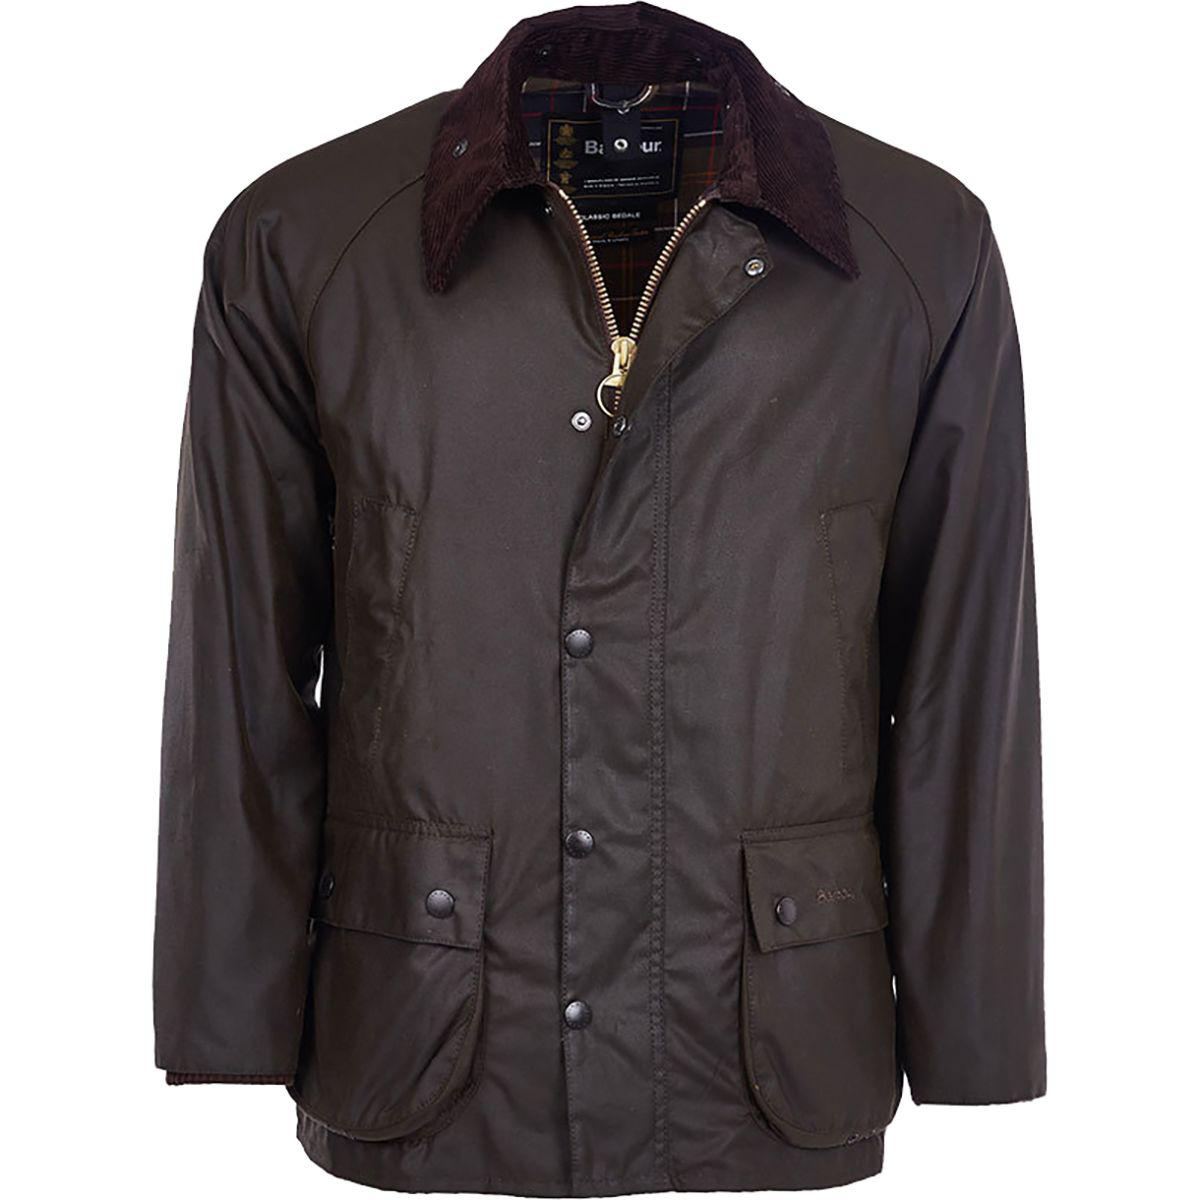 Barbour Cotton Classic Bedale Wax Jacket in Olive (Green) for Men - Lyst